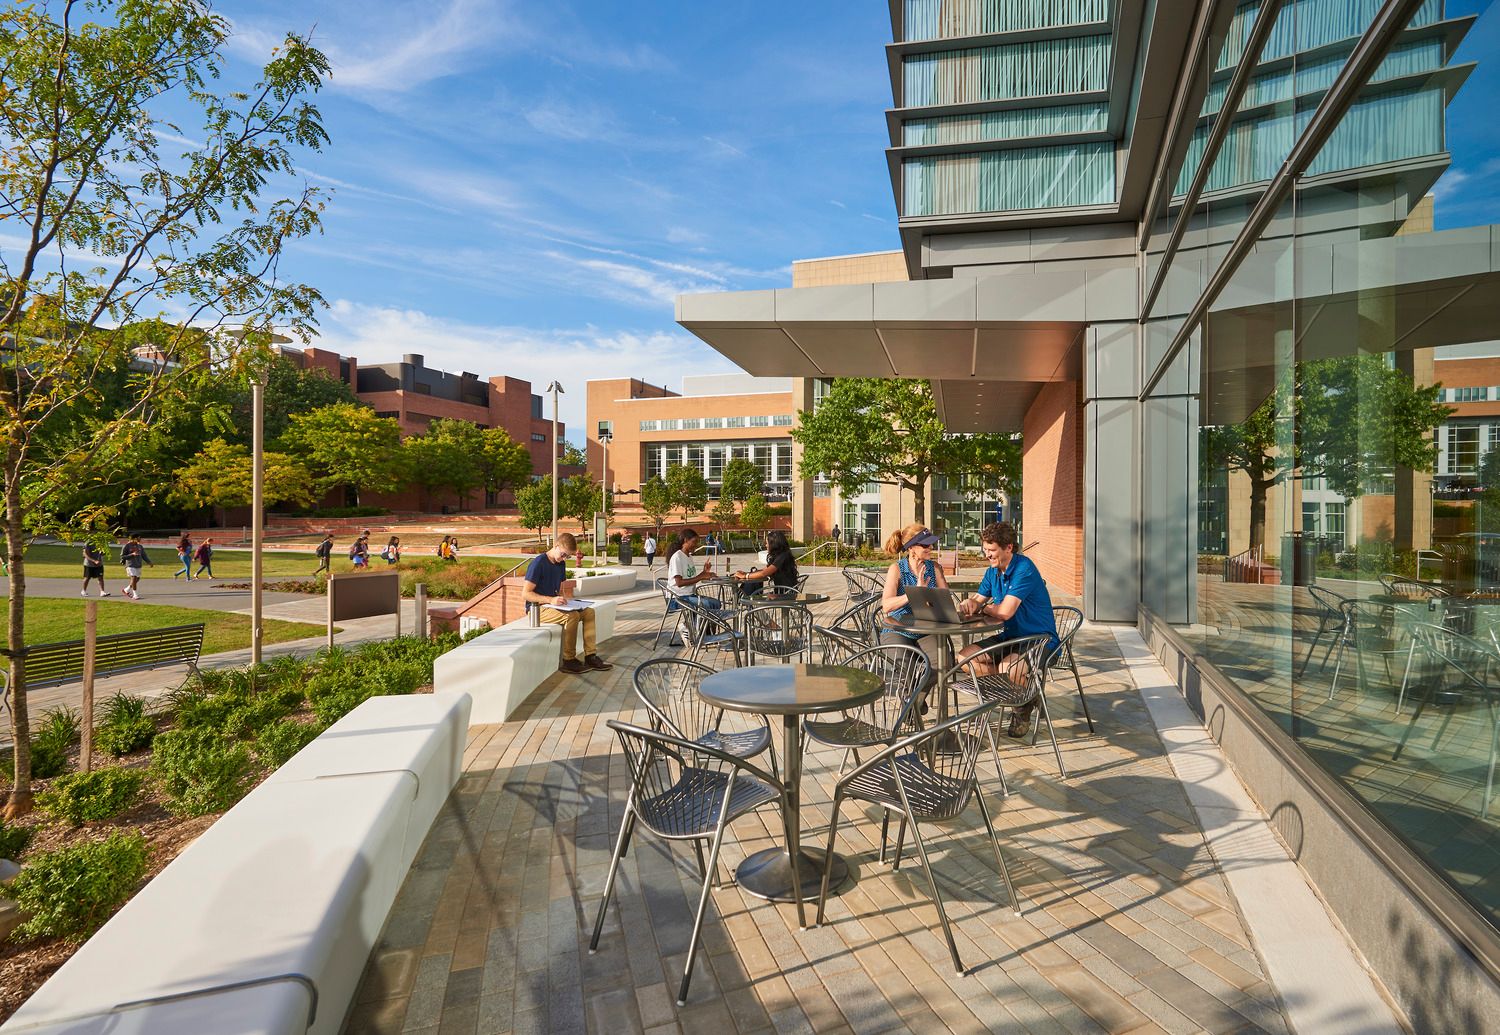 Two students sitting in outdoor patio area overlooking landscaped campus green